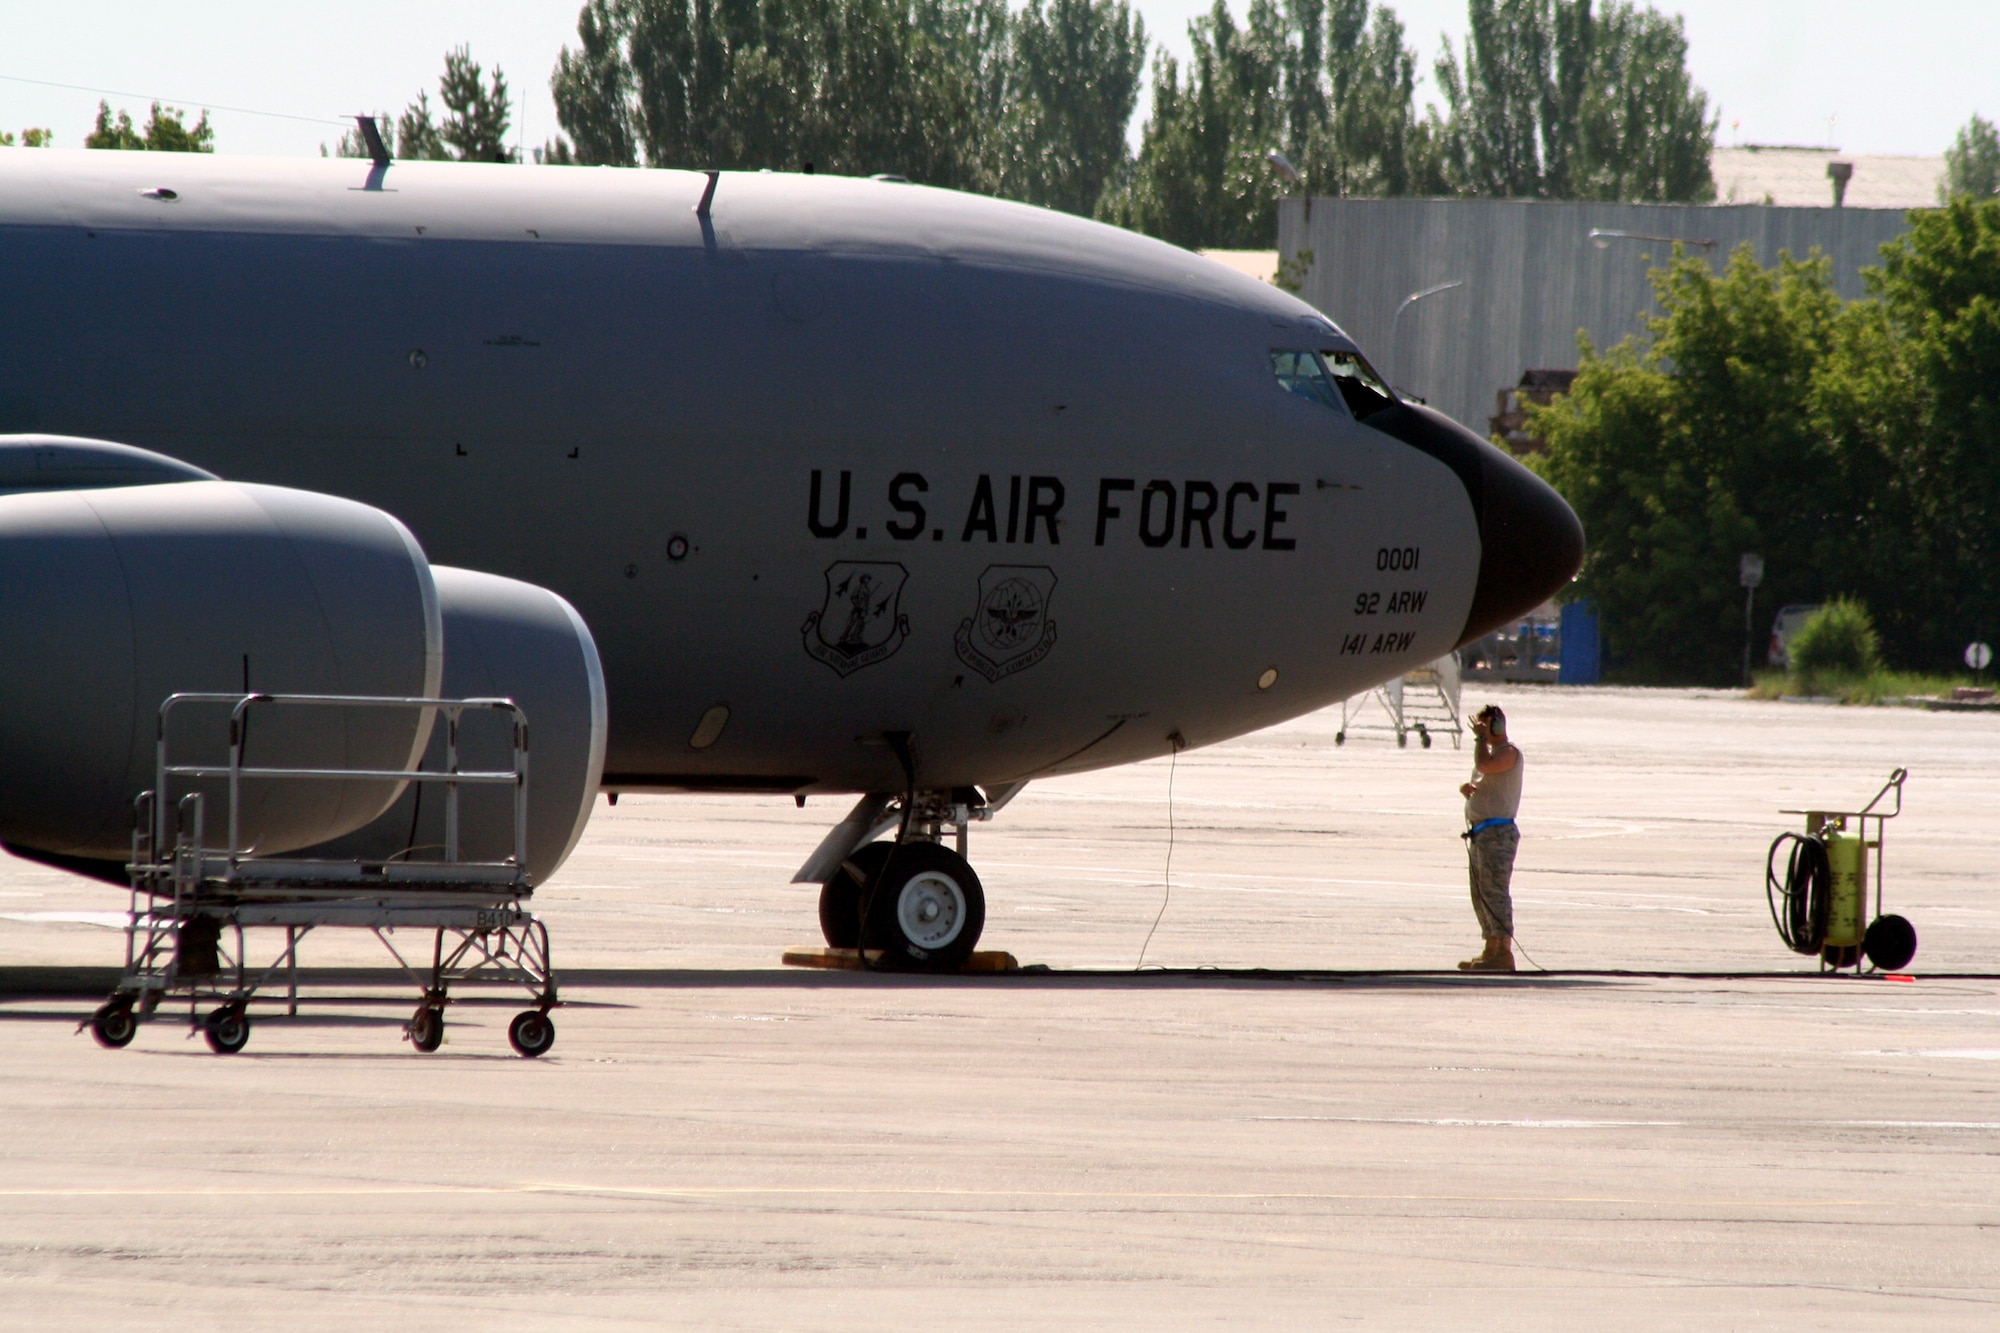 An aircraft maintenance Airmen assigned to the 376th Air Expeditionary Wing prepares KC-135R Stratotanker for a combat air refueling mission from the Transit Center at Manas, Kyrgyzstan, on June 7, 2011. The 376th AEW supports Operation Enduring Freedom and other operations in the U.S. Central Command area of responsibility. (U.S. Air Force Photo/Master Sgt. Scott T. Sturkol)